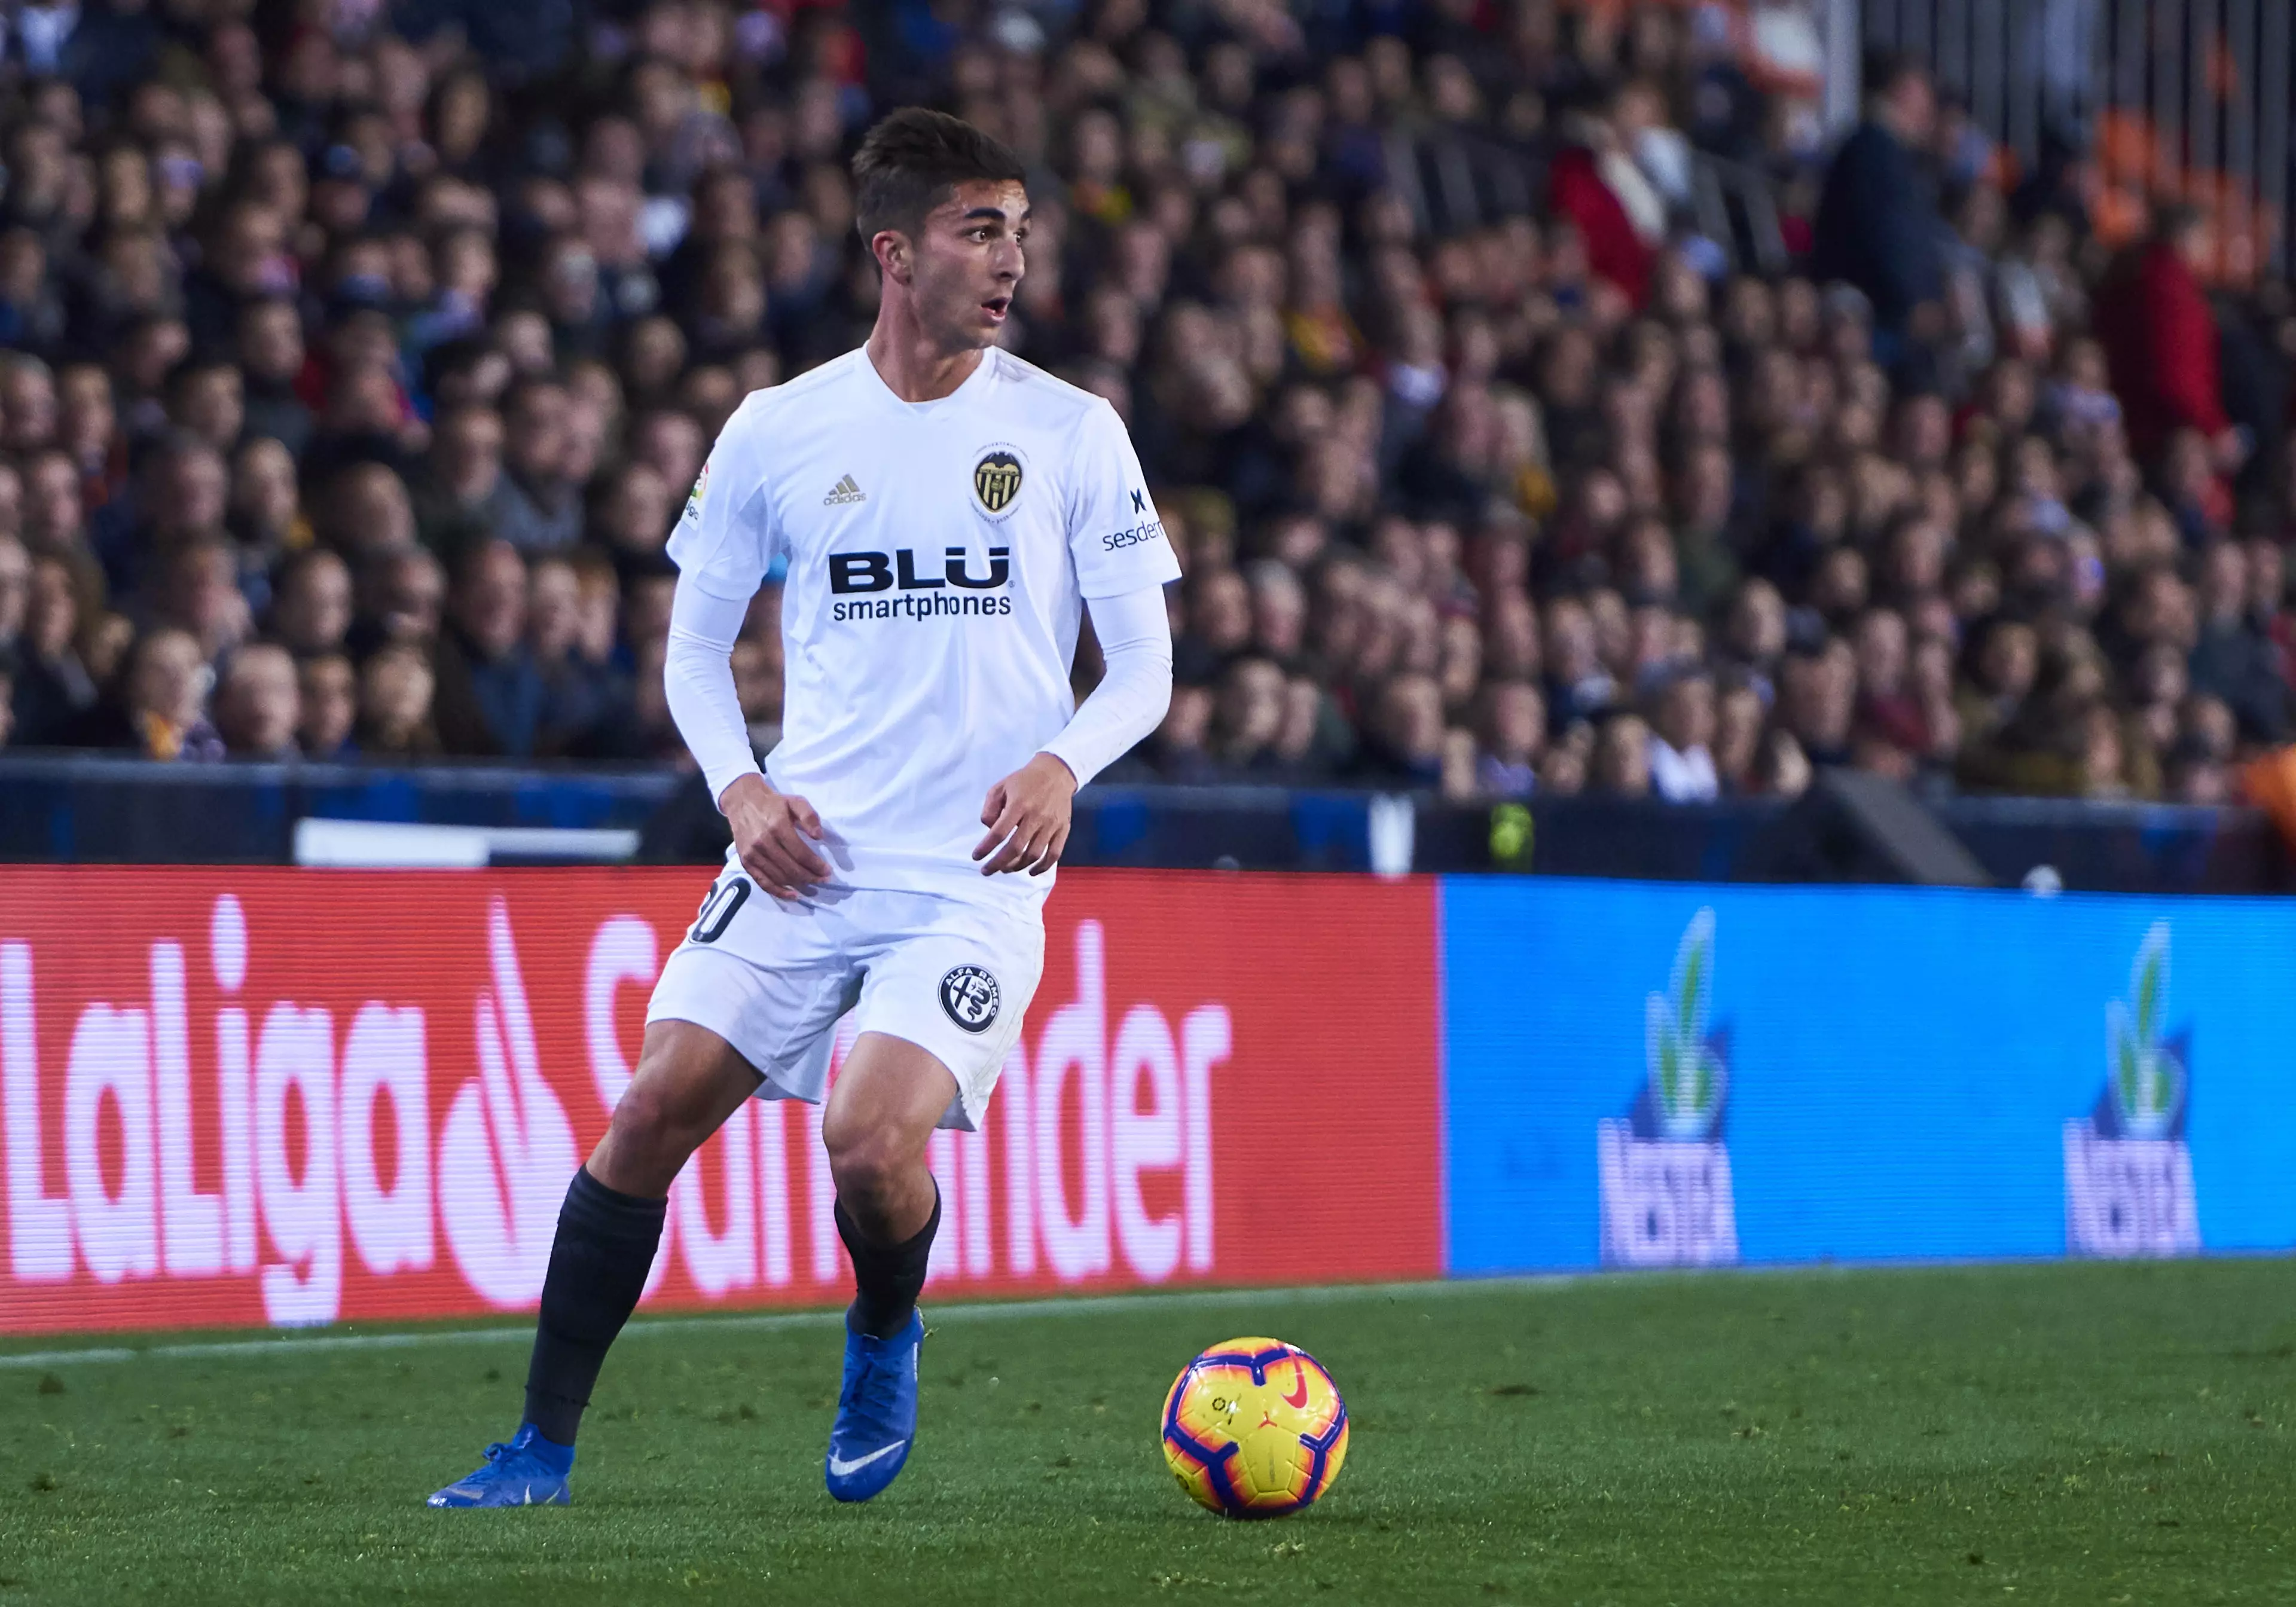 Ferran Torres has impressed for Valencia. Image: PA Images